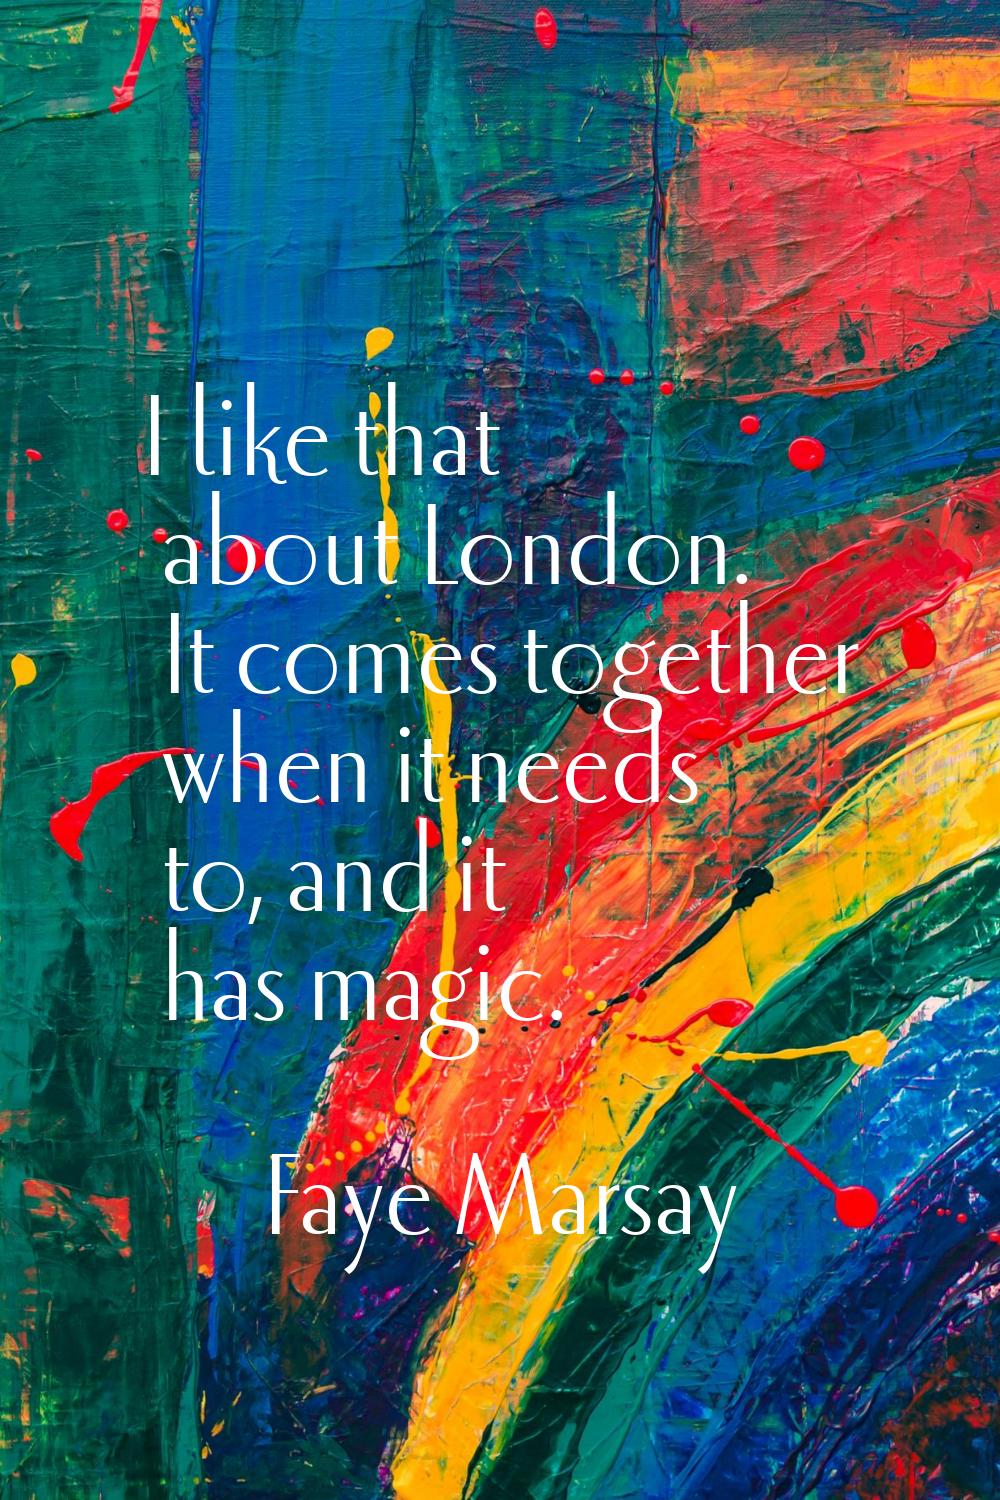 I like that about London. It comes together when it needs to, and it has magic.